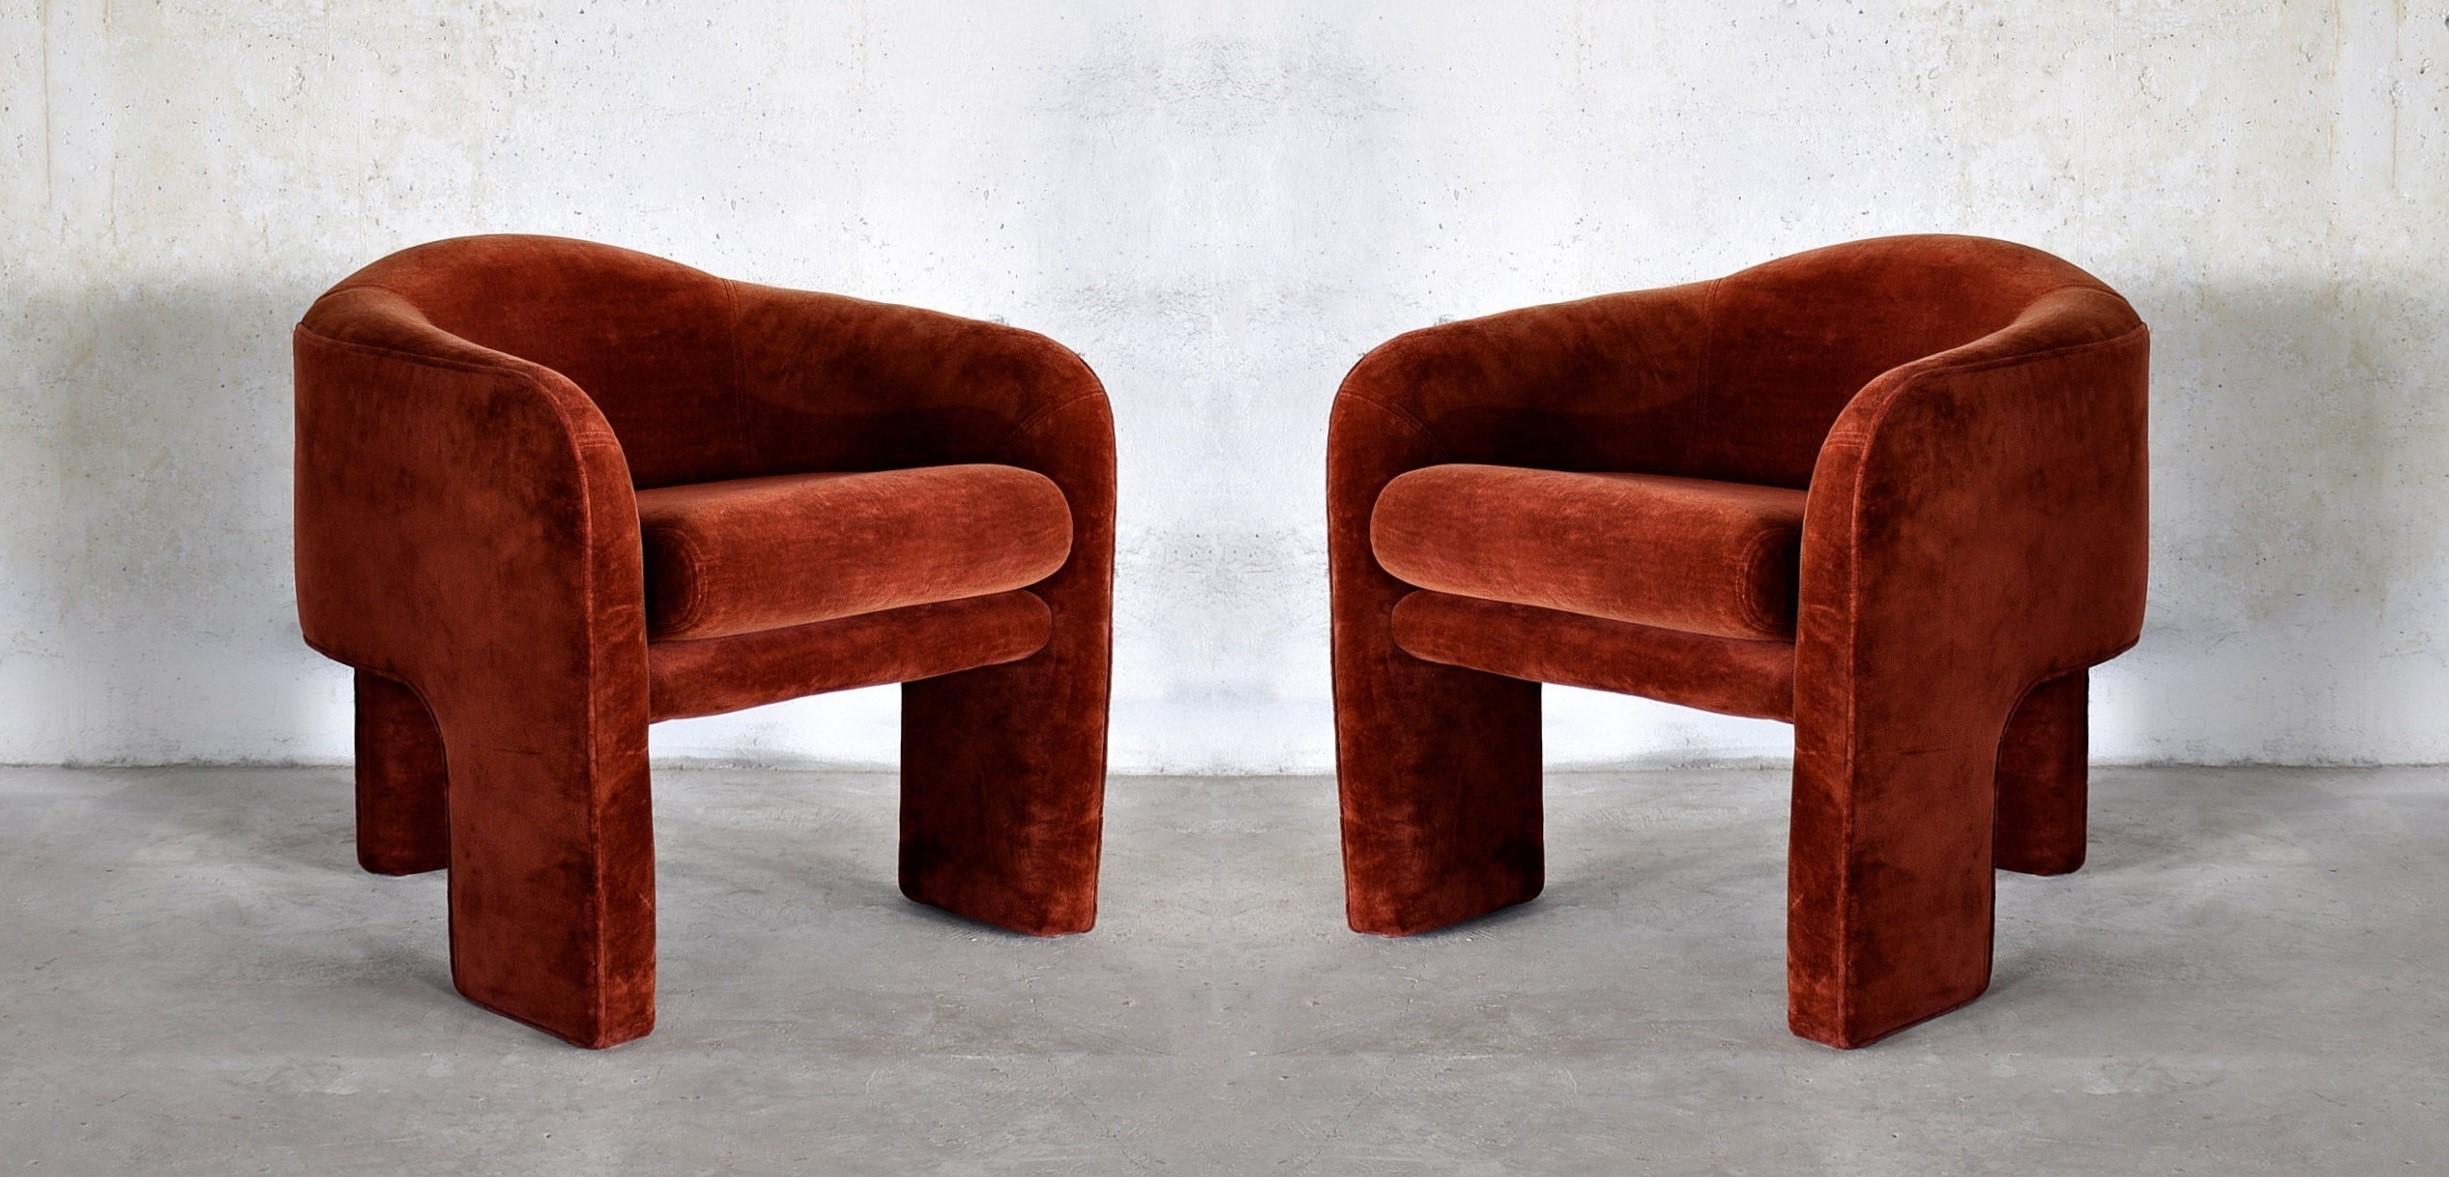 One-of-a-kind three-legged sculptural chairs manufactured by Weiman-Preview. Expertly restored and reupholstered. Dramatic design these chairs are show-stoppers. Marked 